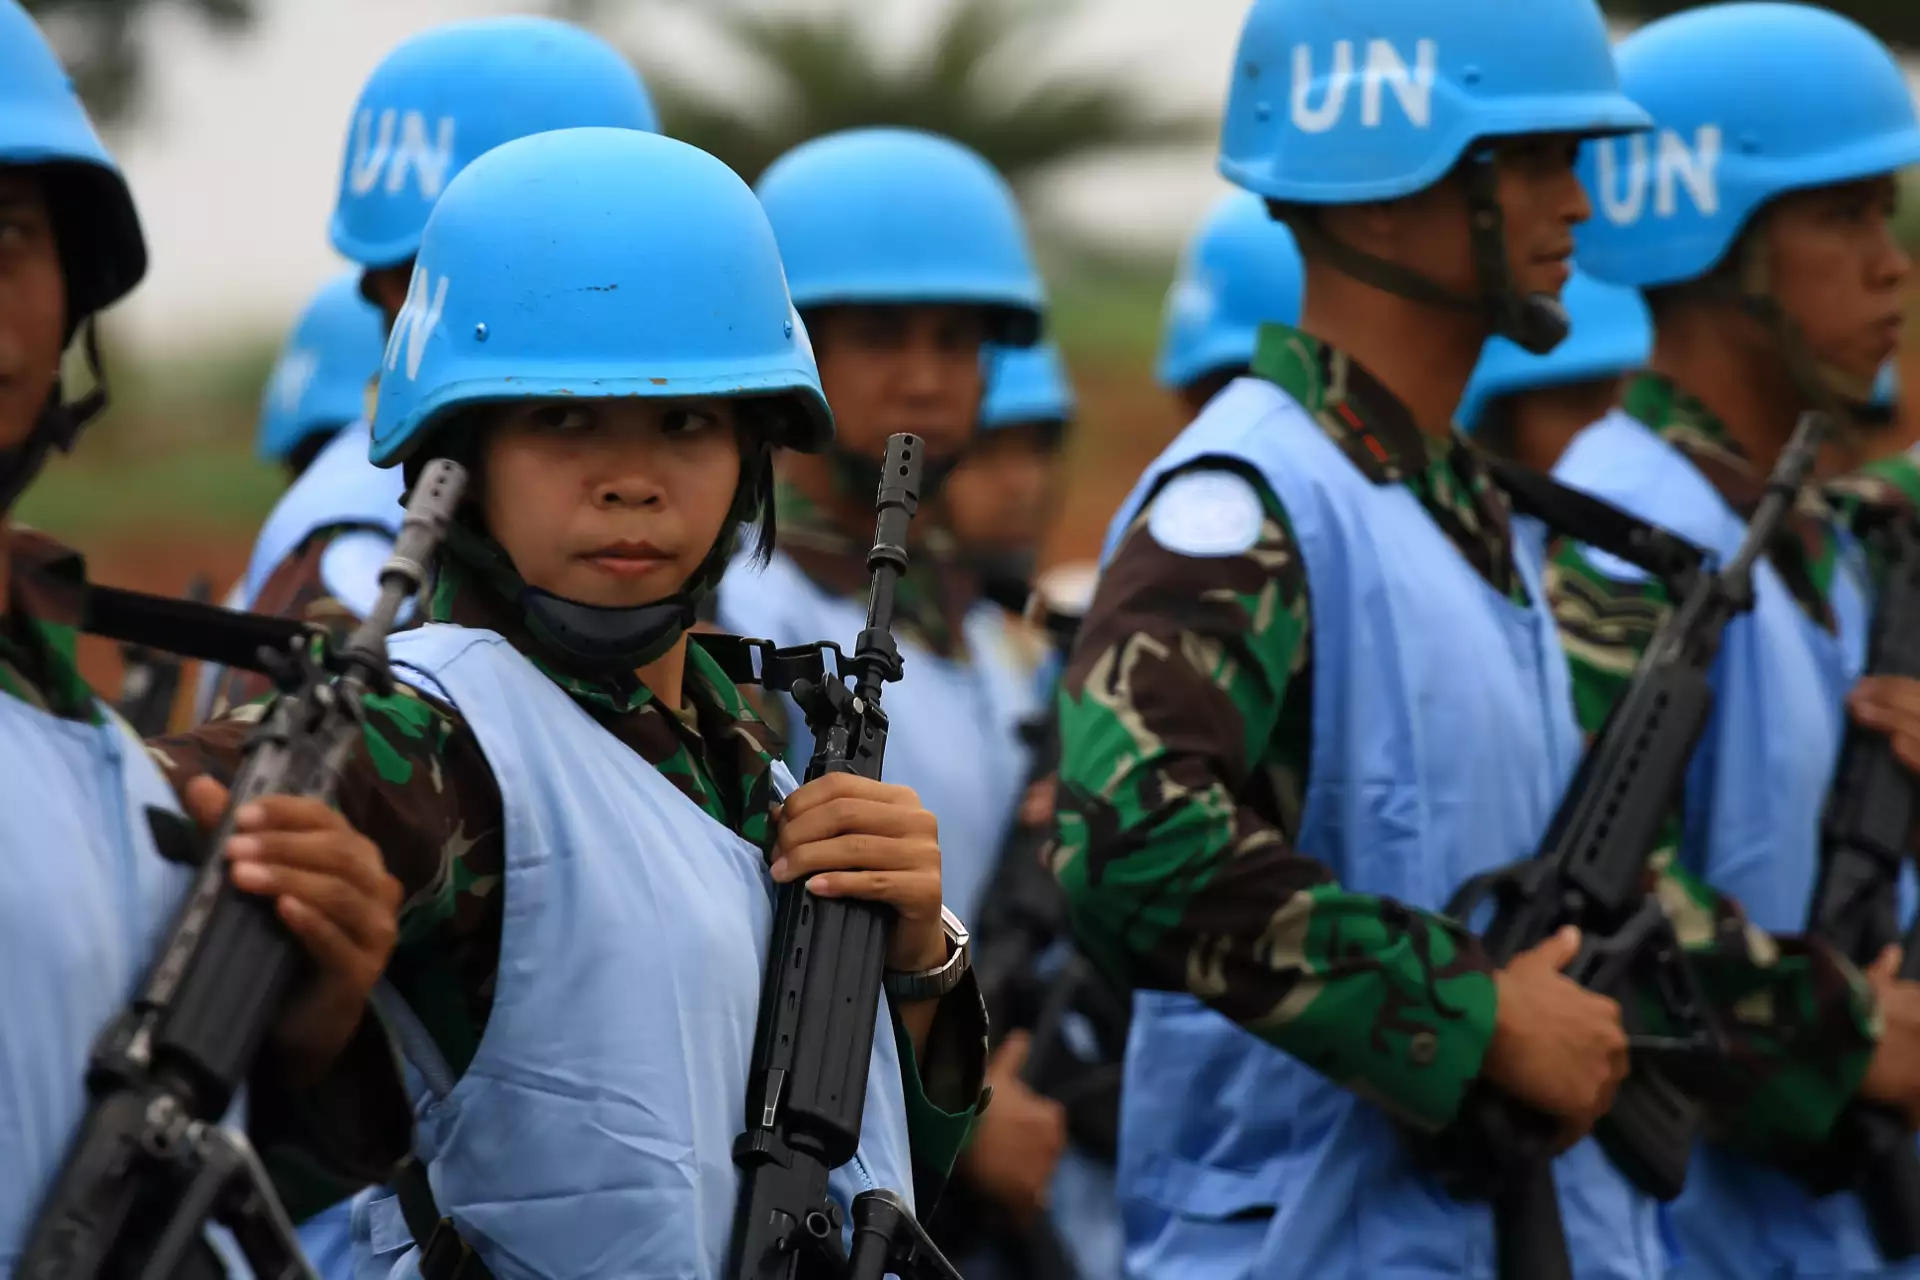 The outlook for UN peacekeeping operations